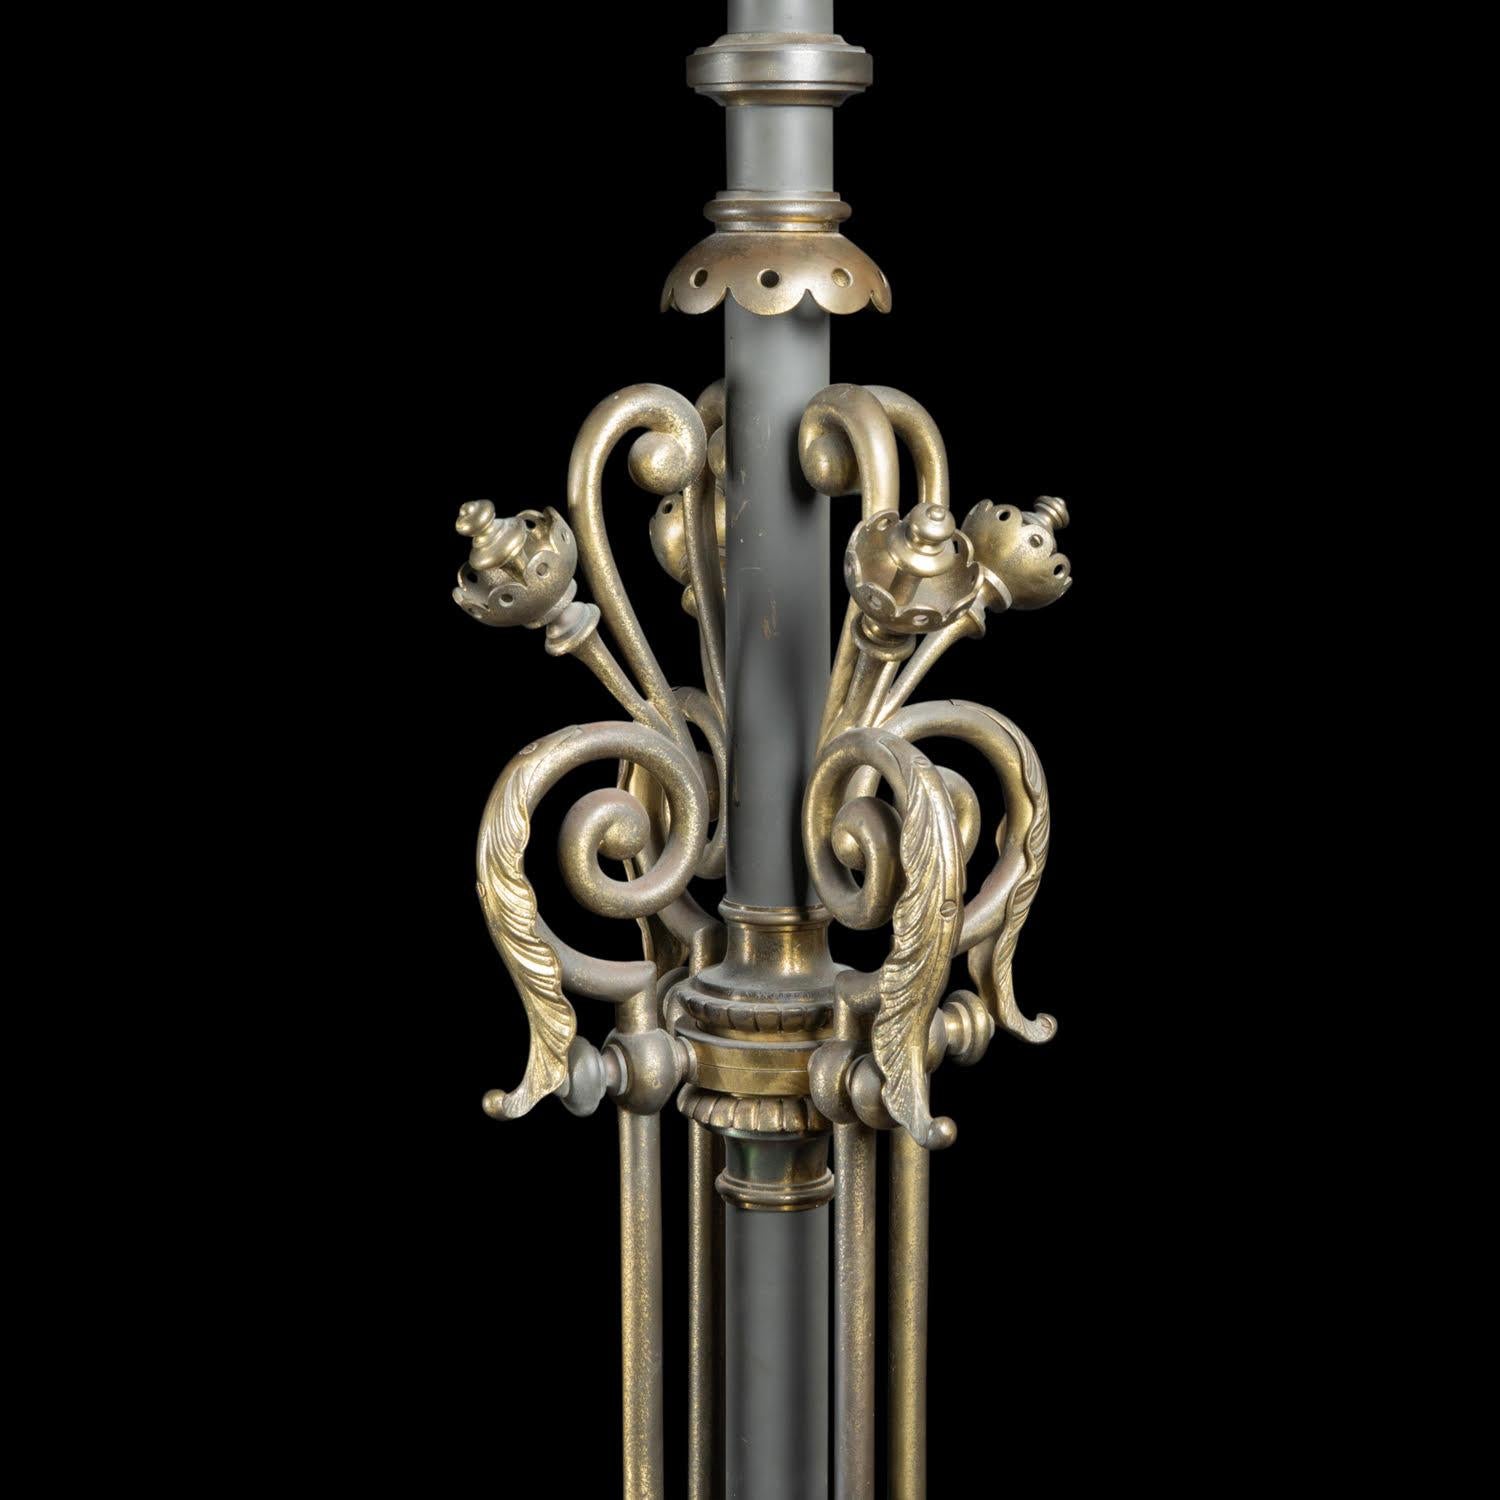 Pair of torchères, Napoleon III period, 19th century.

Pair of bronze torchères with mahogany base, Napoleon III period, 19th century.  
H: 188cm, W: 44.5cm, D: 44.5cm